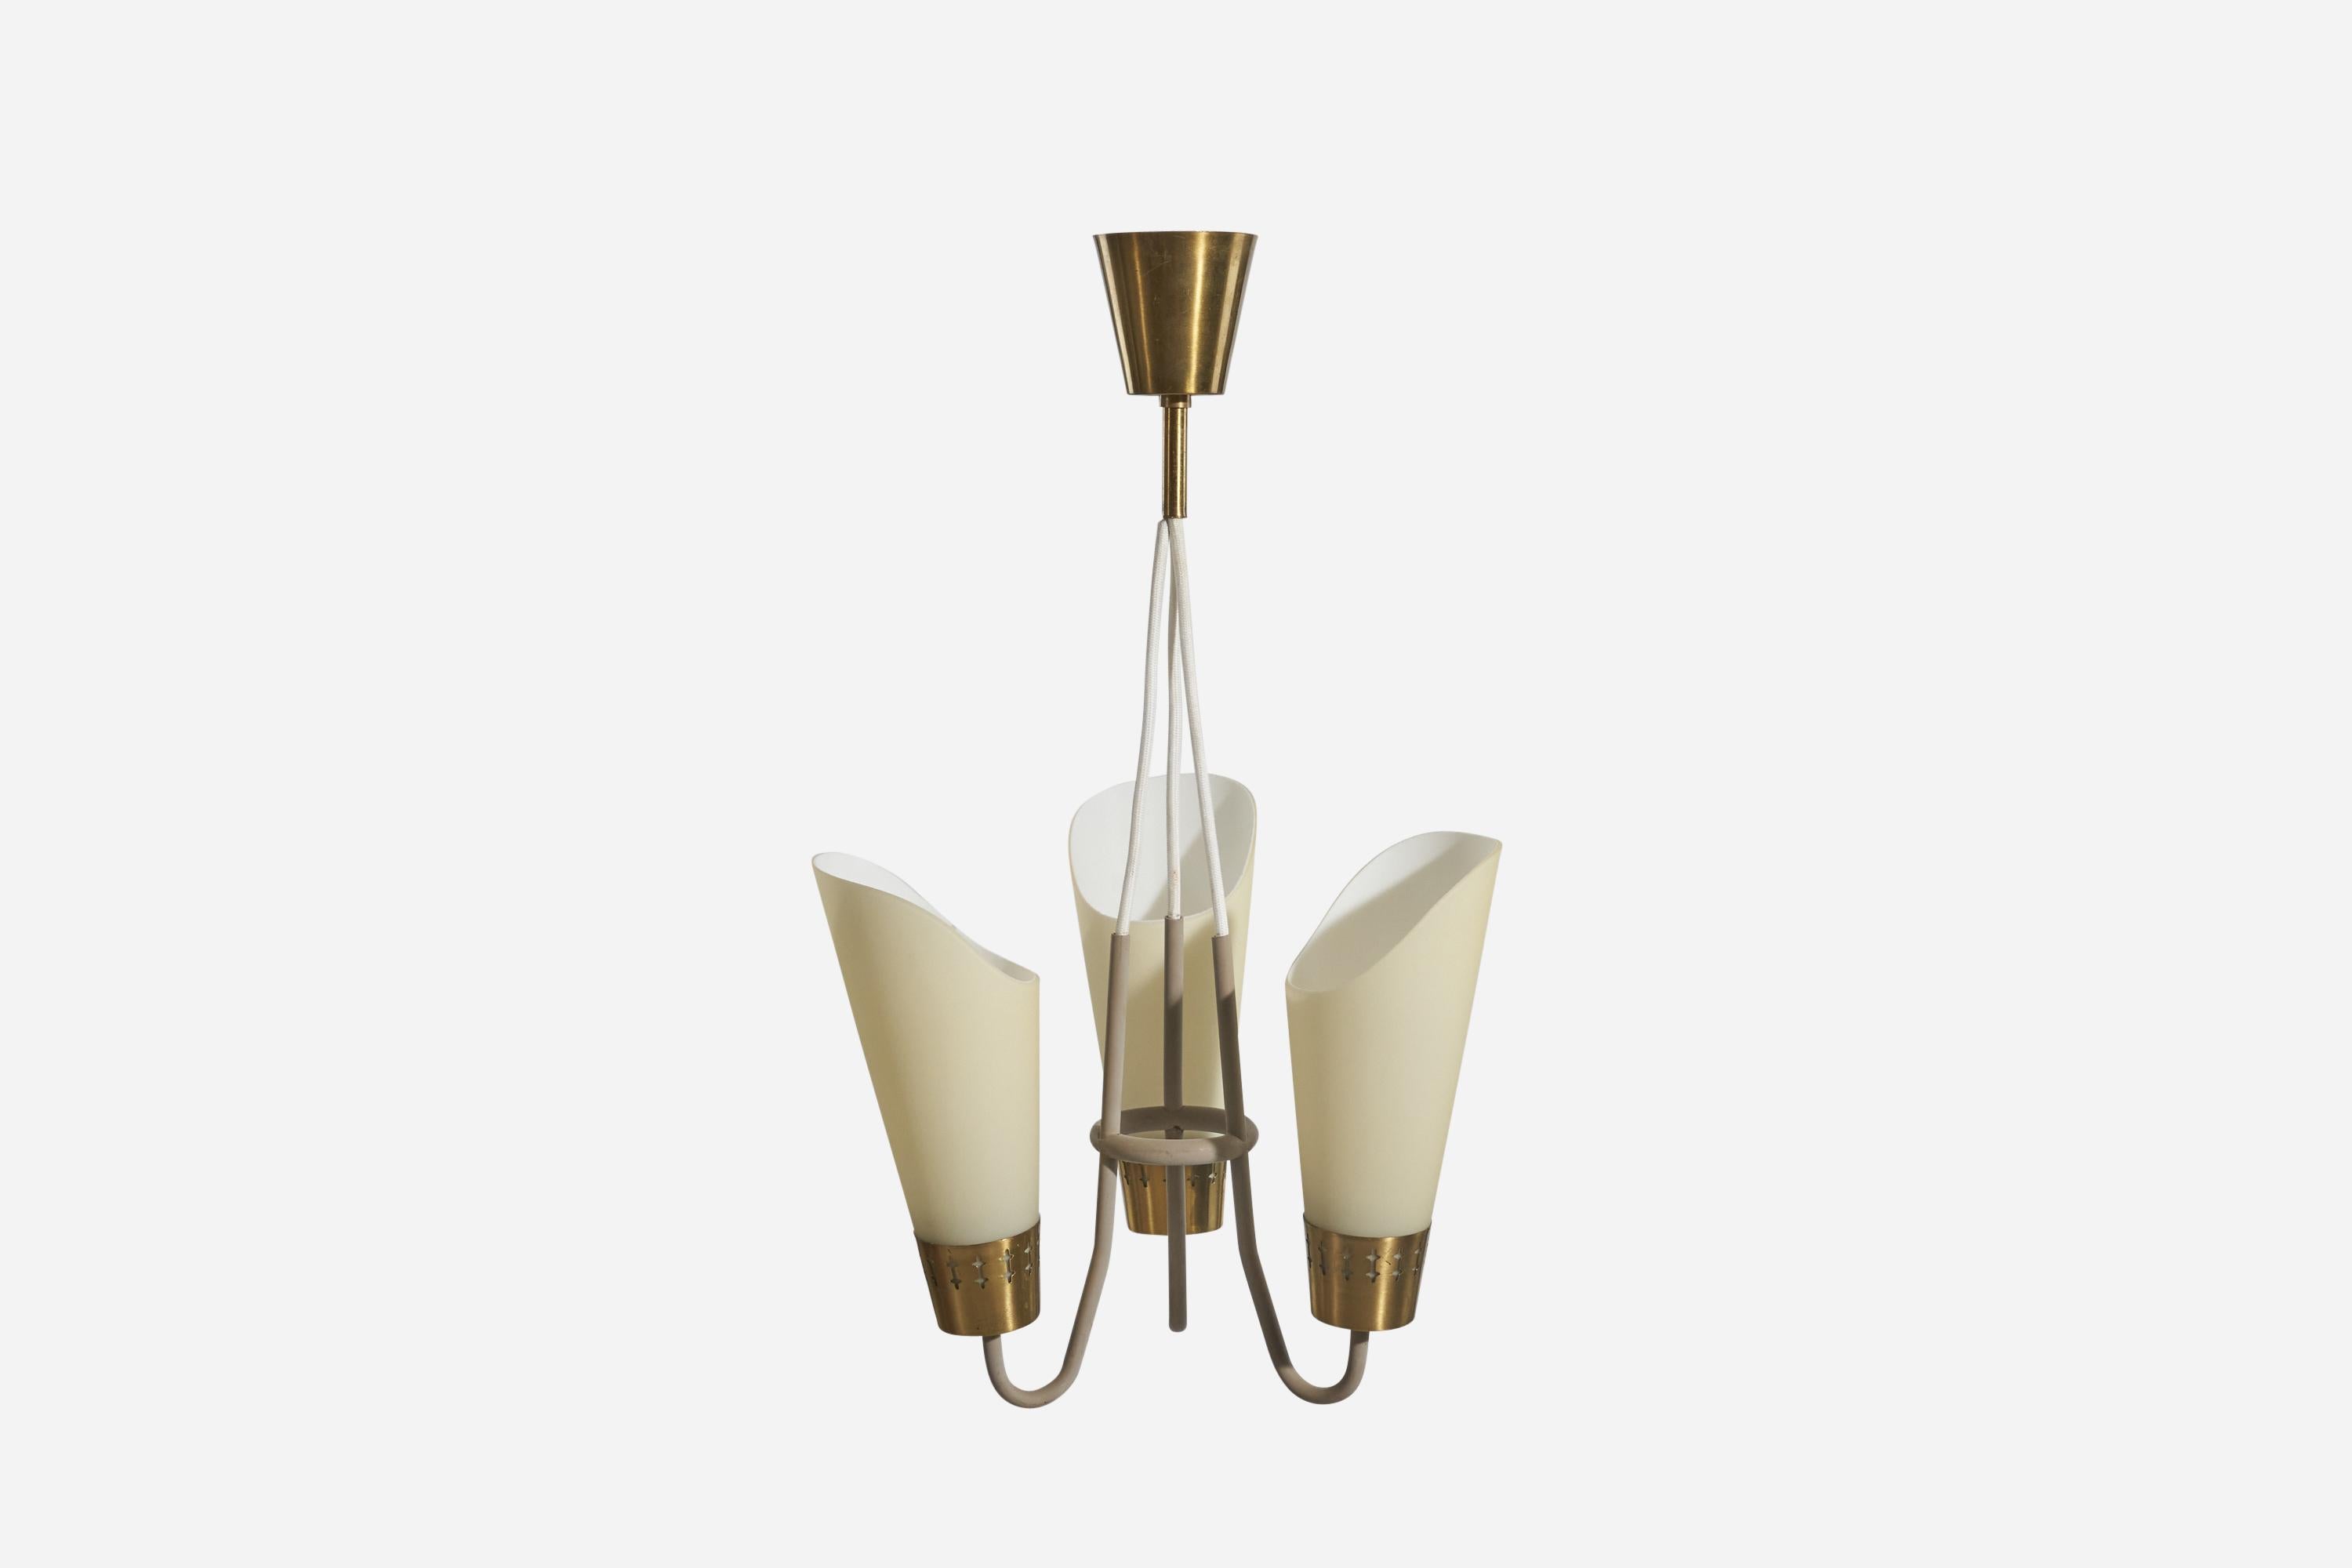 A brass and glass, 3-light chandelier designed by Hans Bergström and produced by ASEA, Sweden, 1950s. 

Dimensions of canopy (inches) : 3.12 x 3.25 x 3.25 (Height x Width x Depth).

Socket takes standard E-26 medium base bulb.
There is no